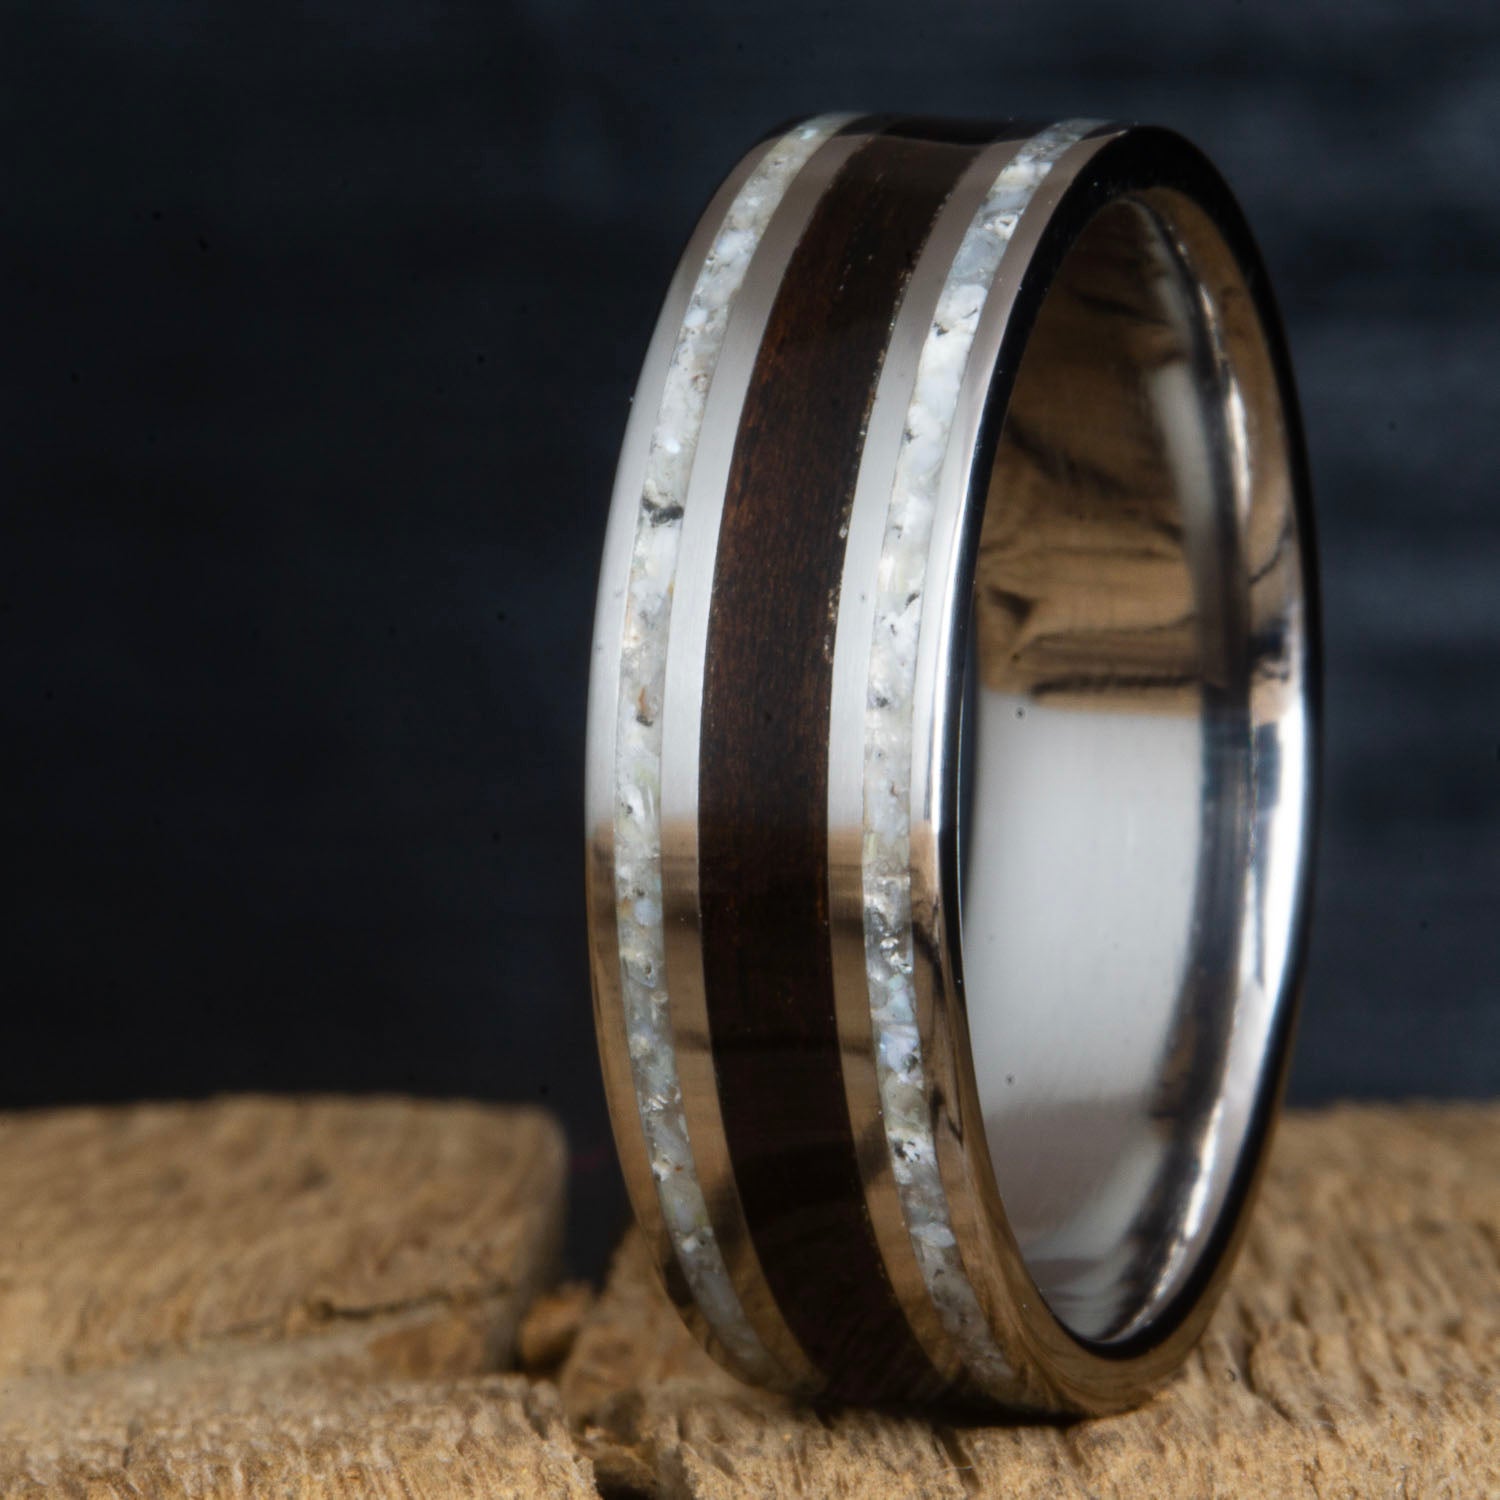 Ebony ring with double mother of pearl inlay